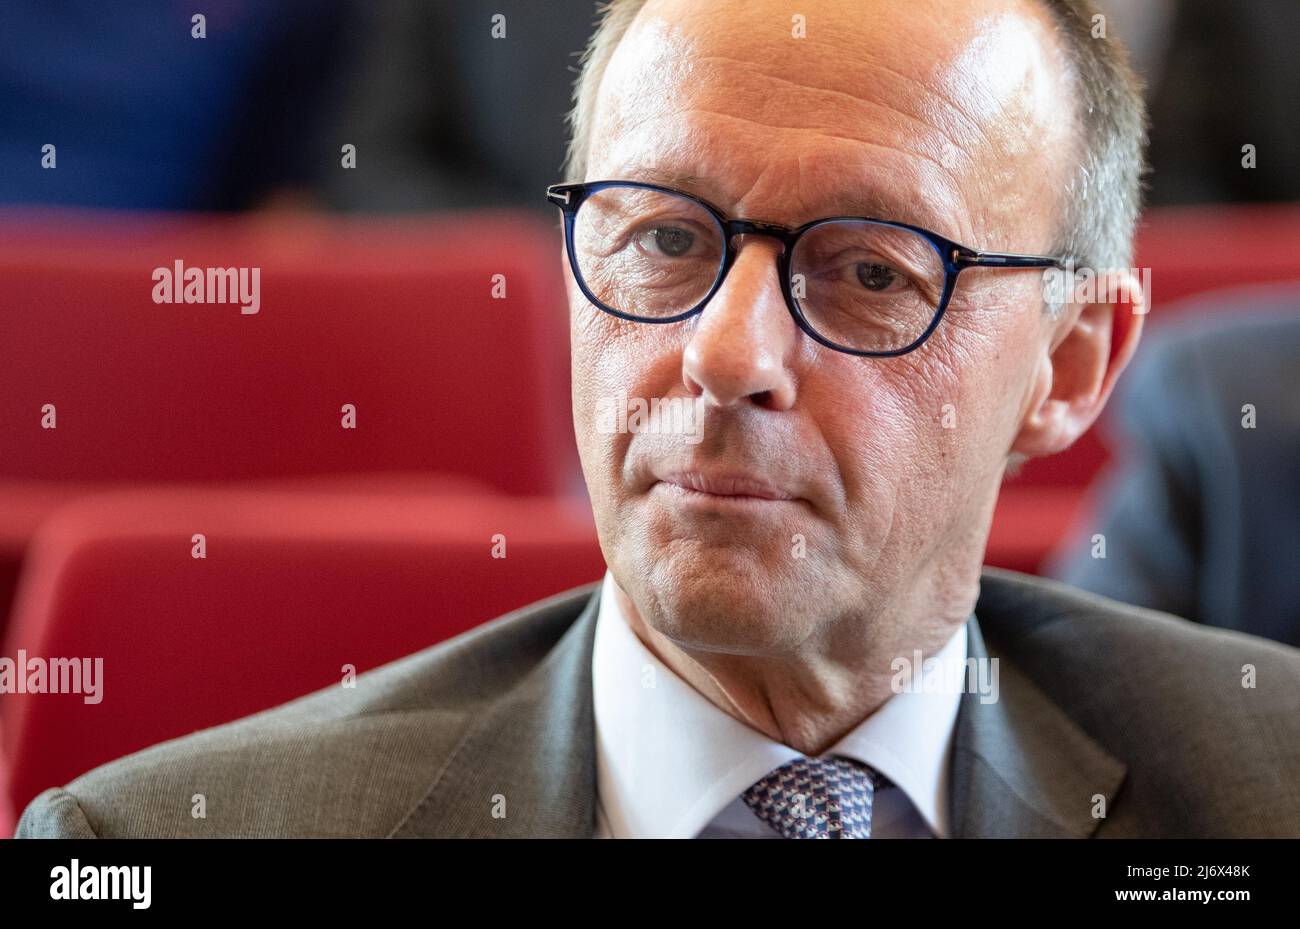 04 May 2022, North Rhine-Westphalia, Bad Salzuflen: Friedrich Merz, Federal  Chairman of the CDU, is a guest at a CDU campaign event in the run-up to  the state election. The election for